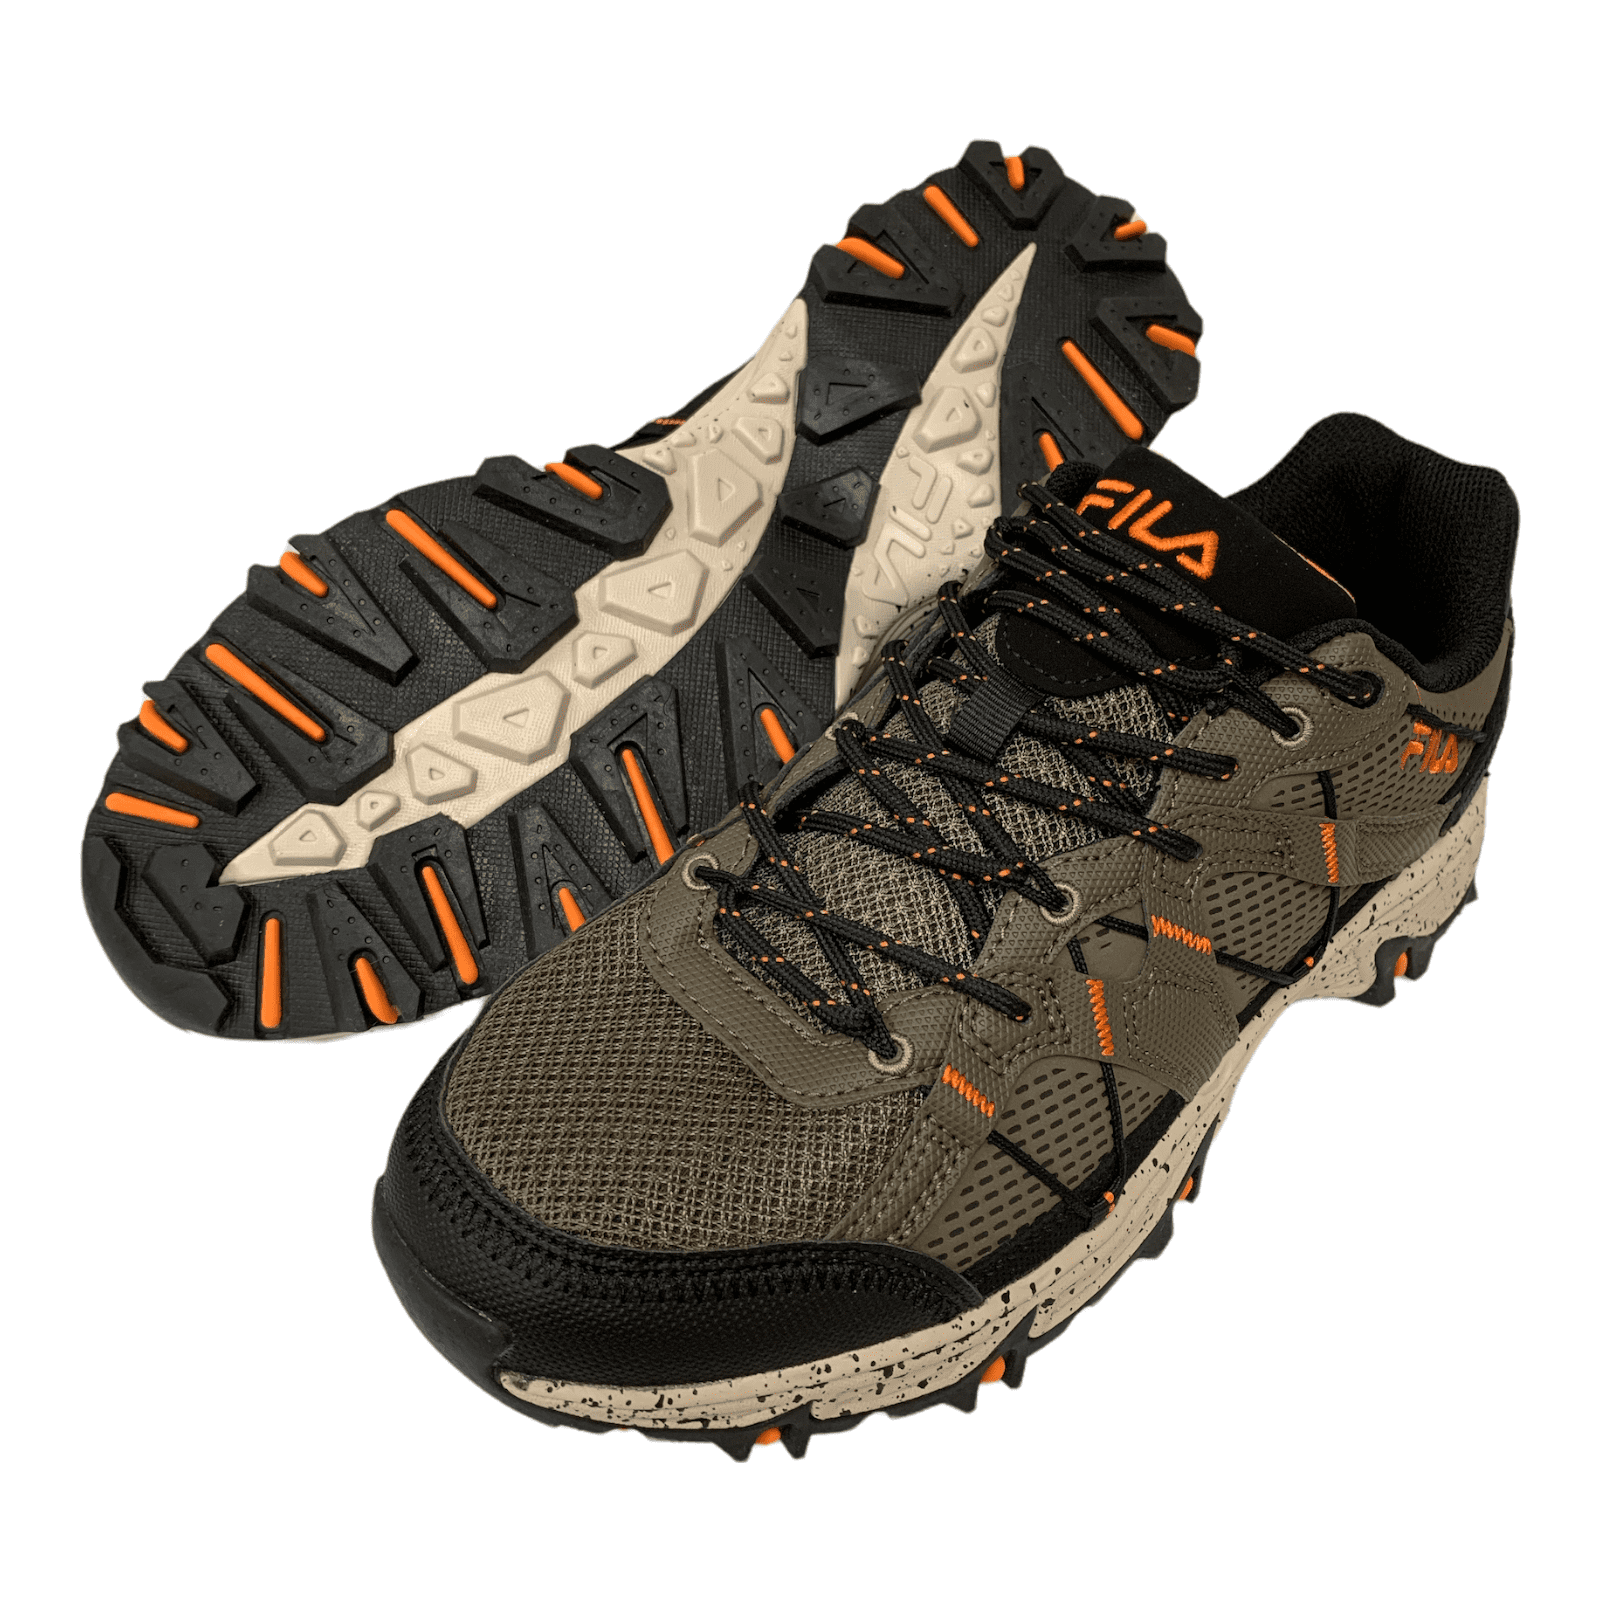 Are Fila Shoes Good for Hiking?